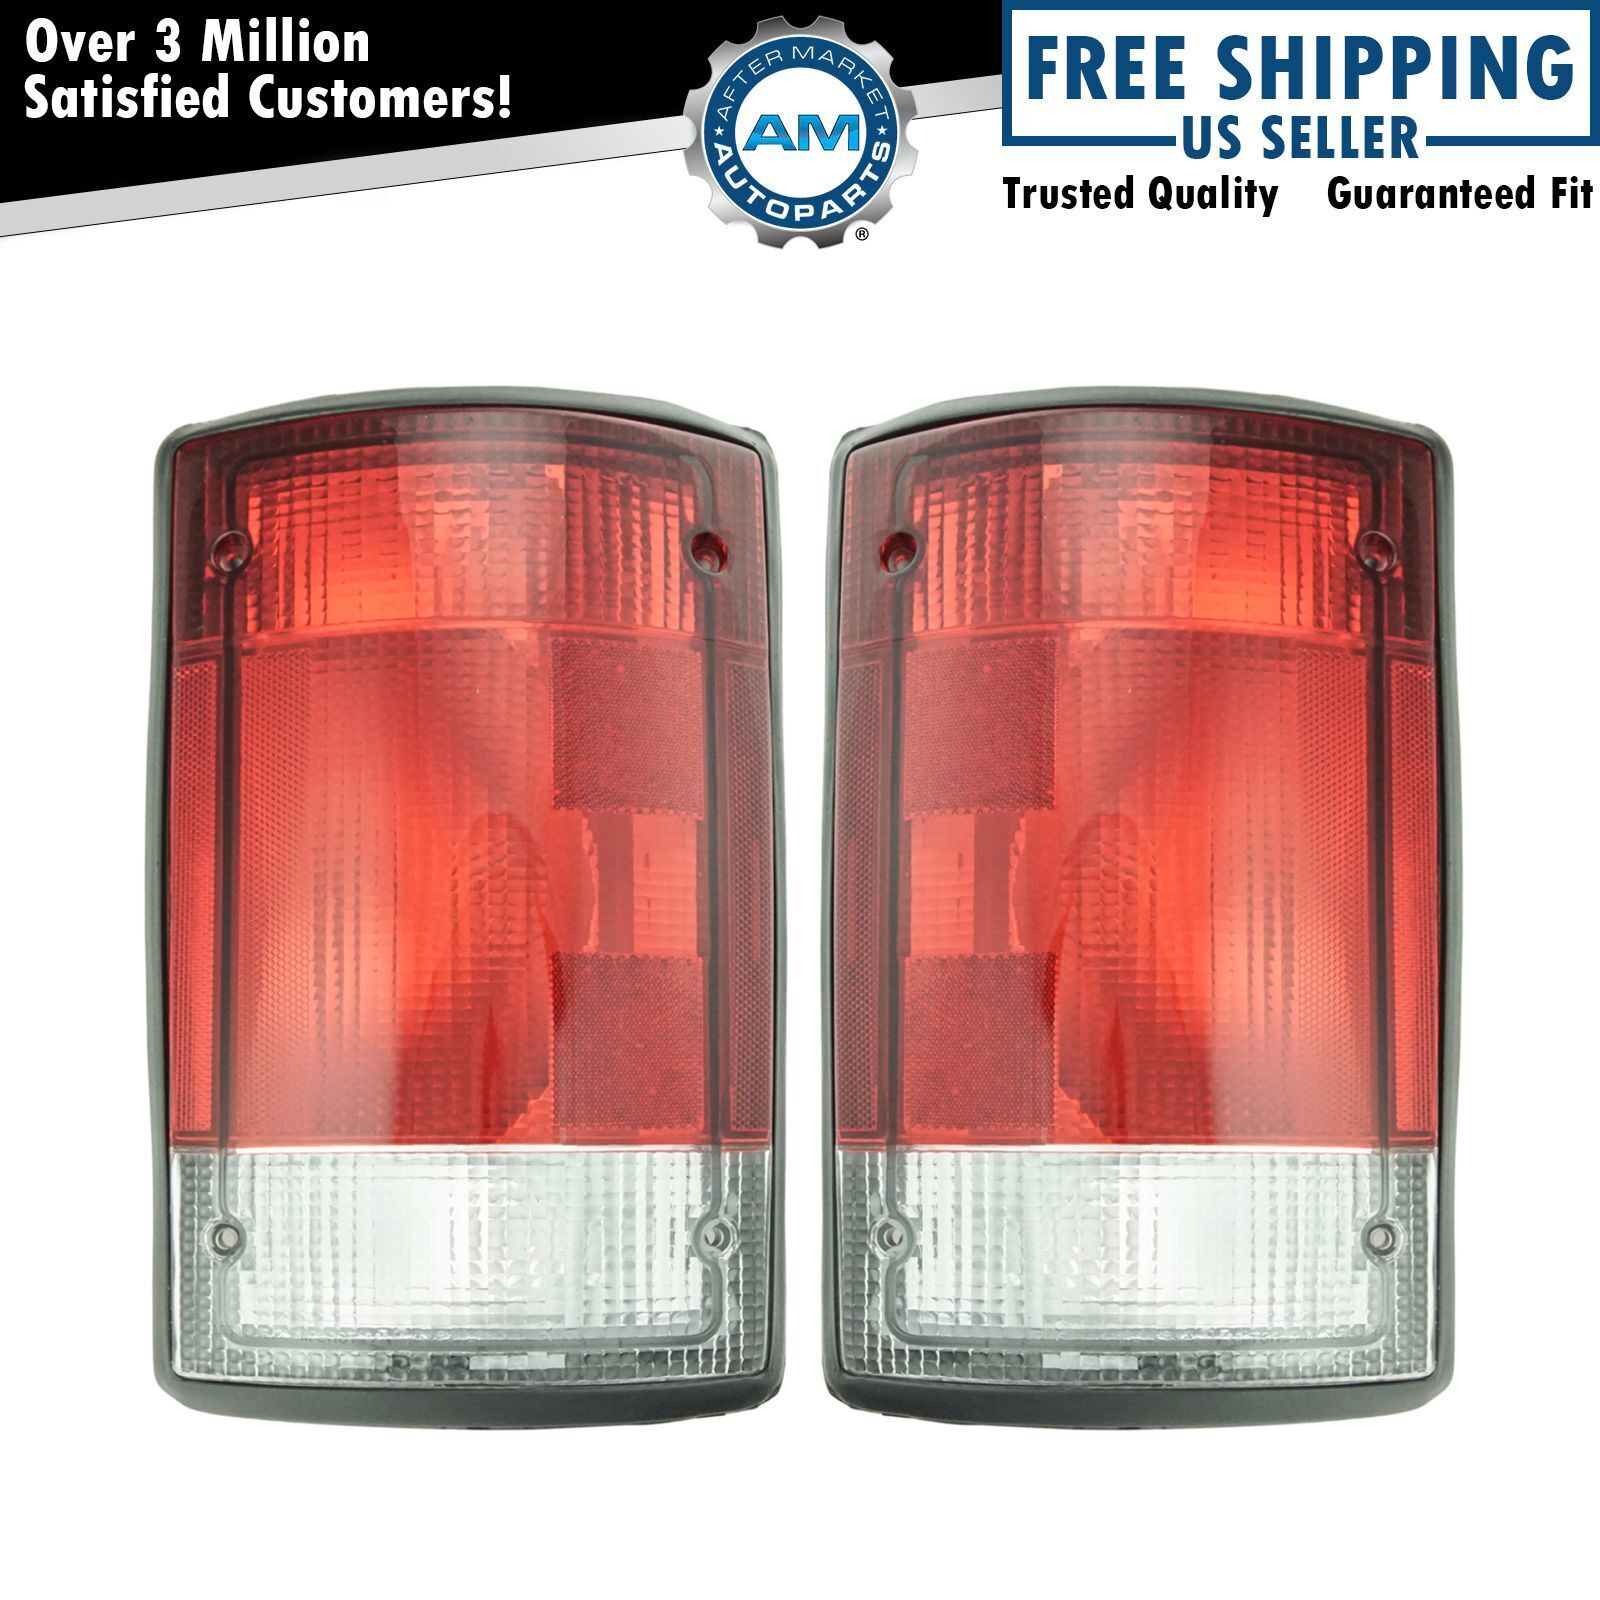 Tail Lights Taillamps Left & Right Pair Set For Ford Van E150 E250 350 Excursion